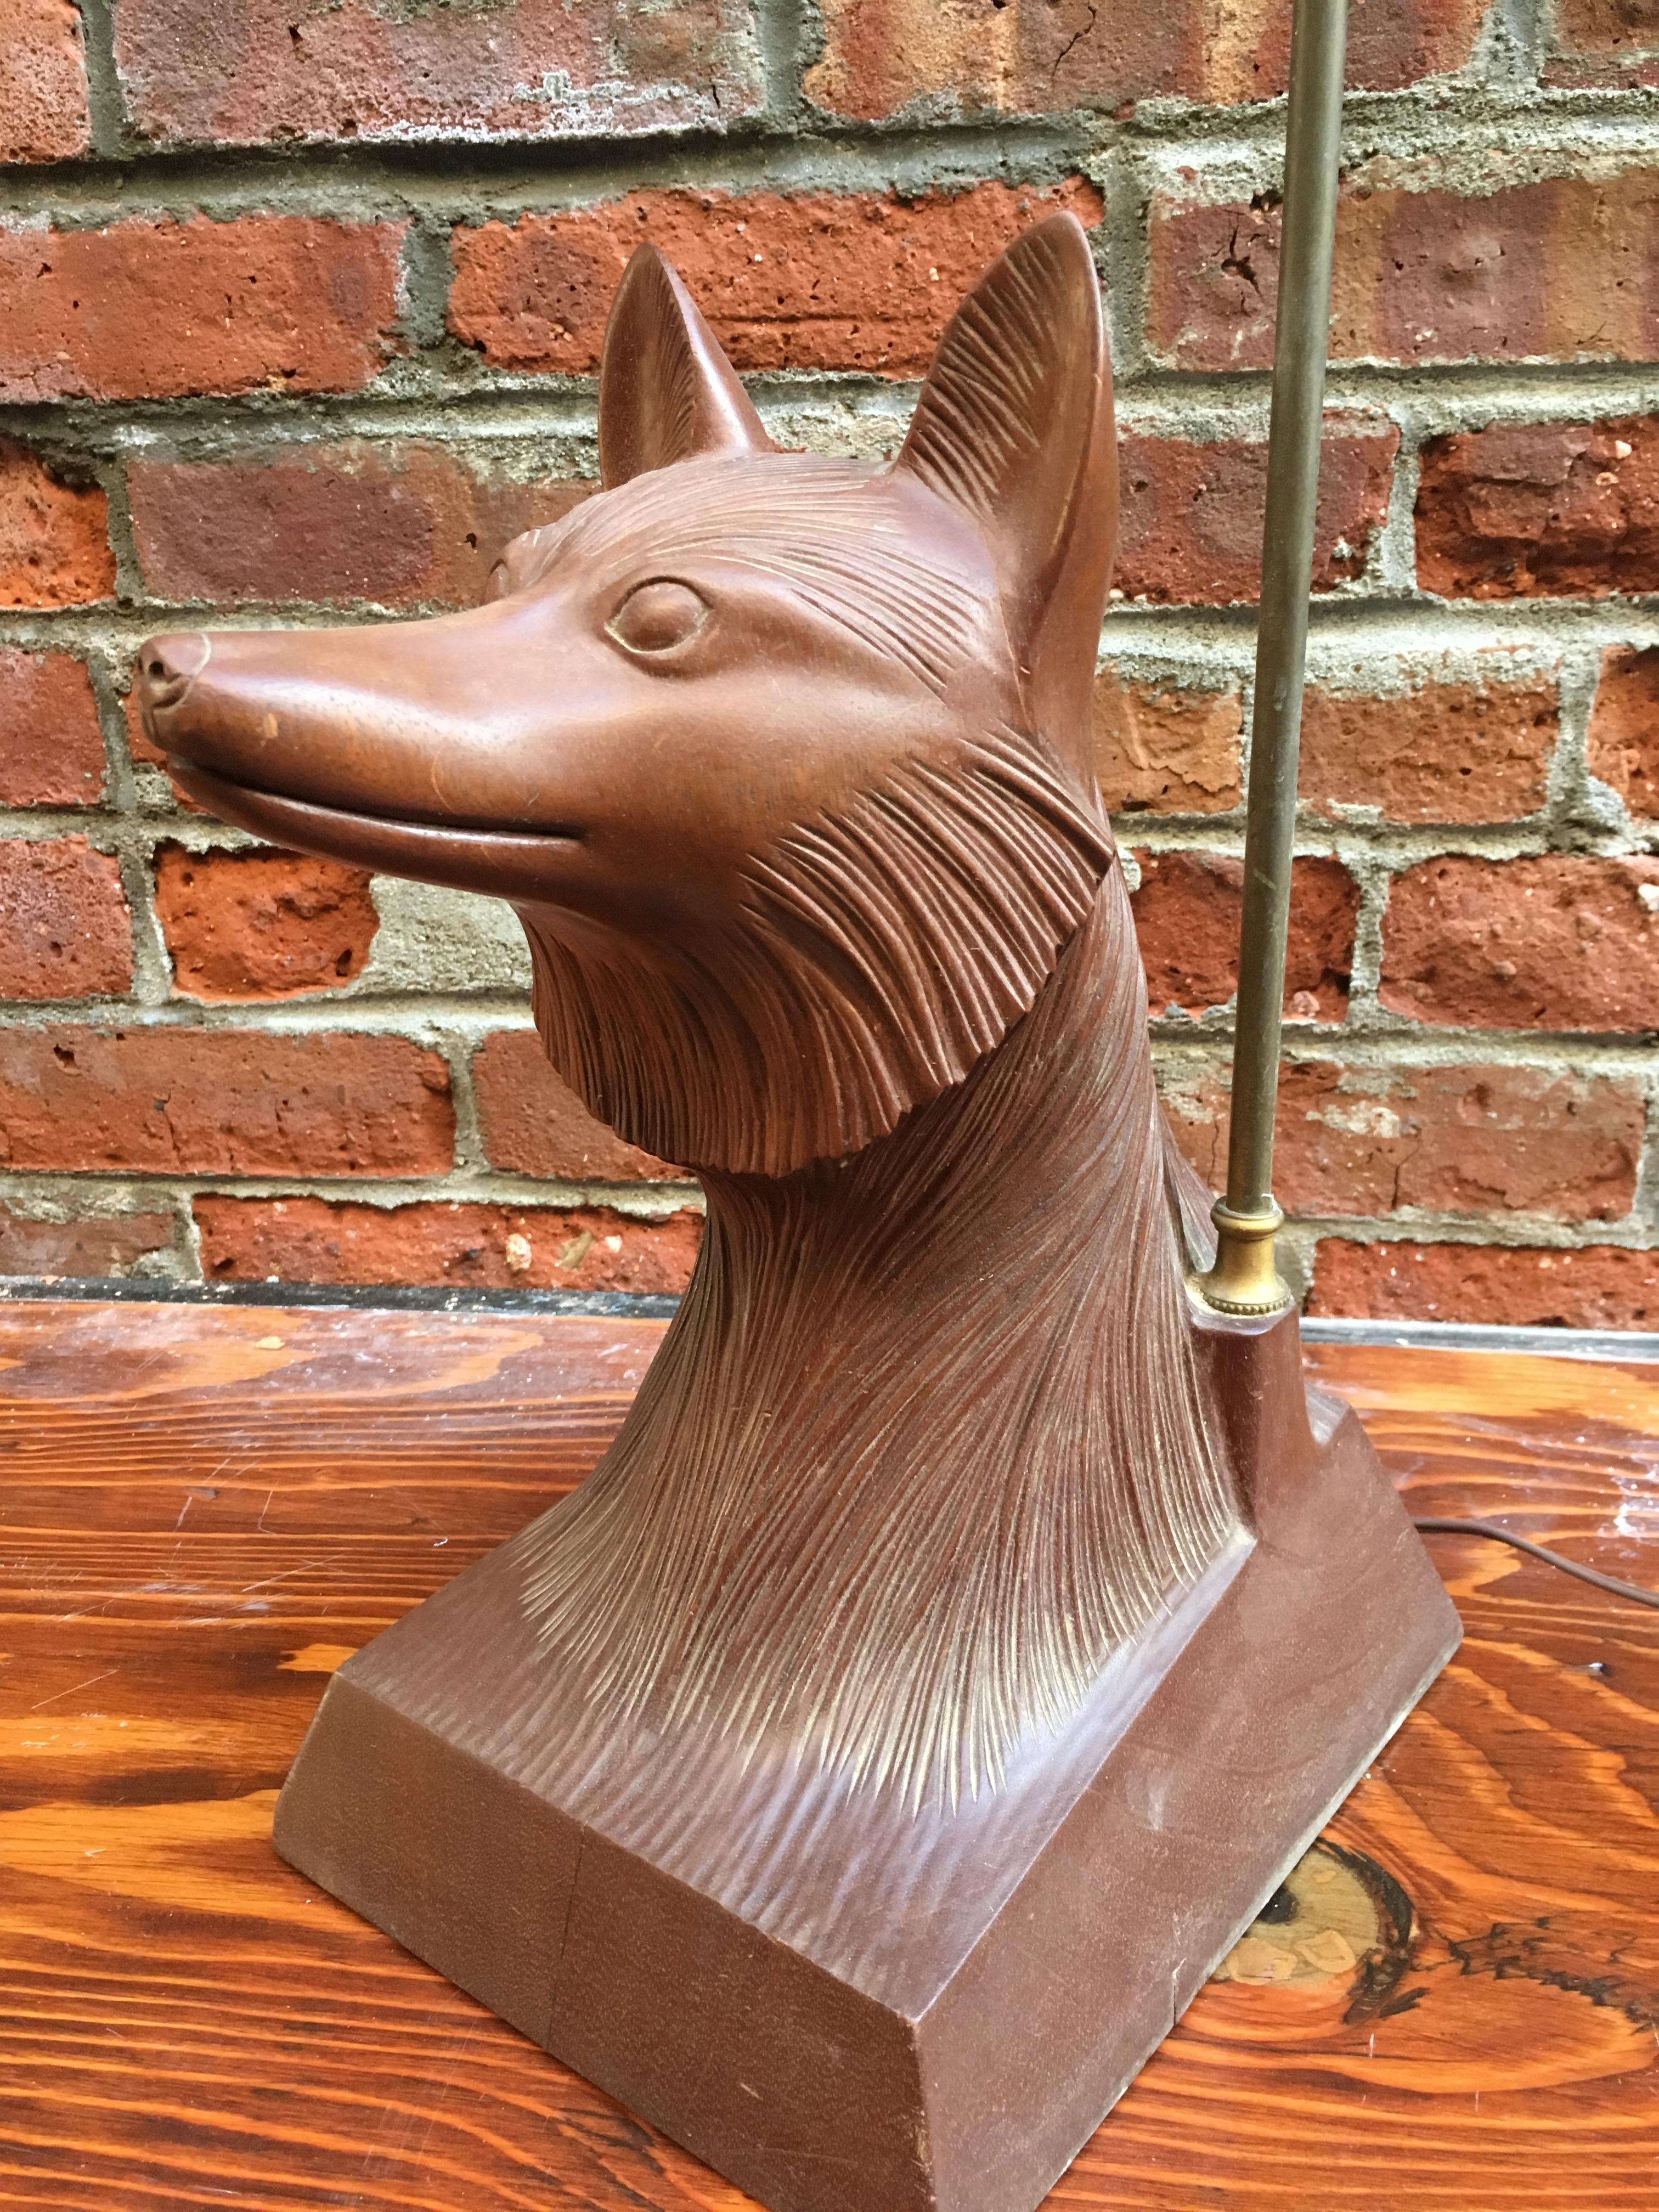 Very distinct and labor intensive solid wood carved fox head table lamp, circa 1950. Signed on the back, Makin. Very good working condition. Shade not included.

Approximate carving measurements are 10